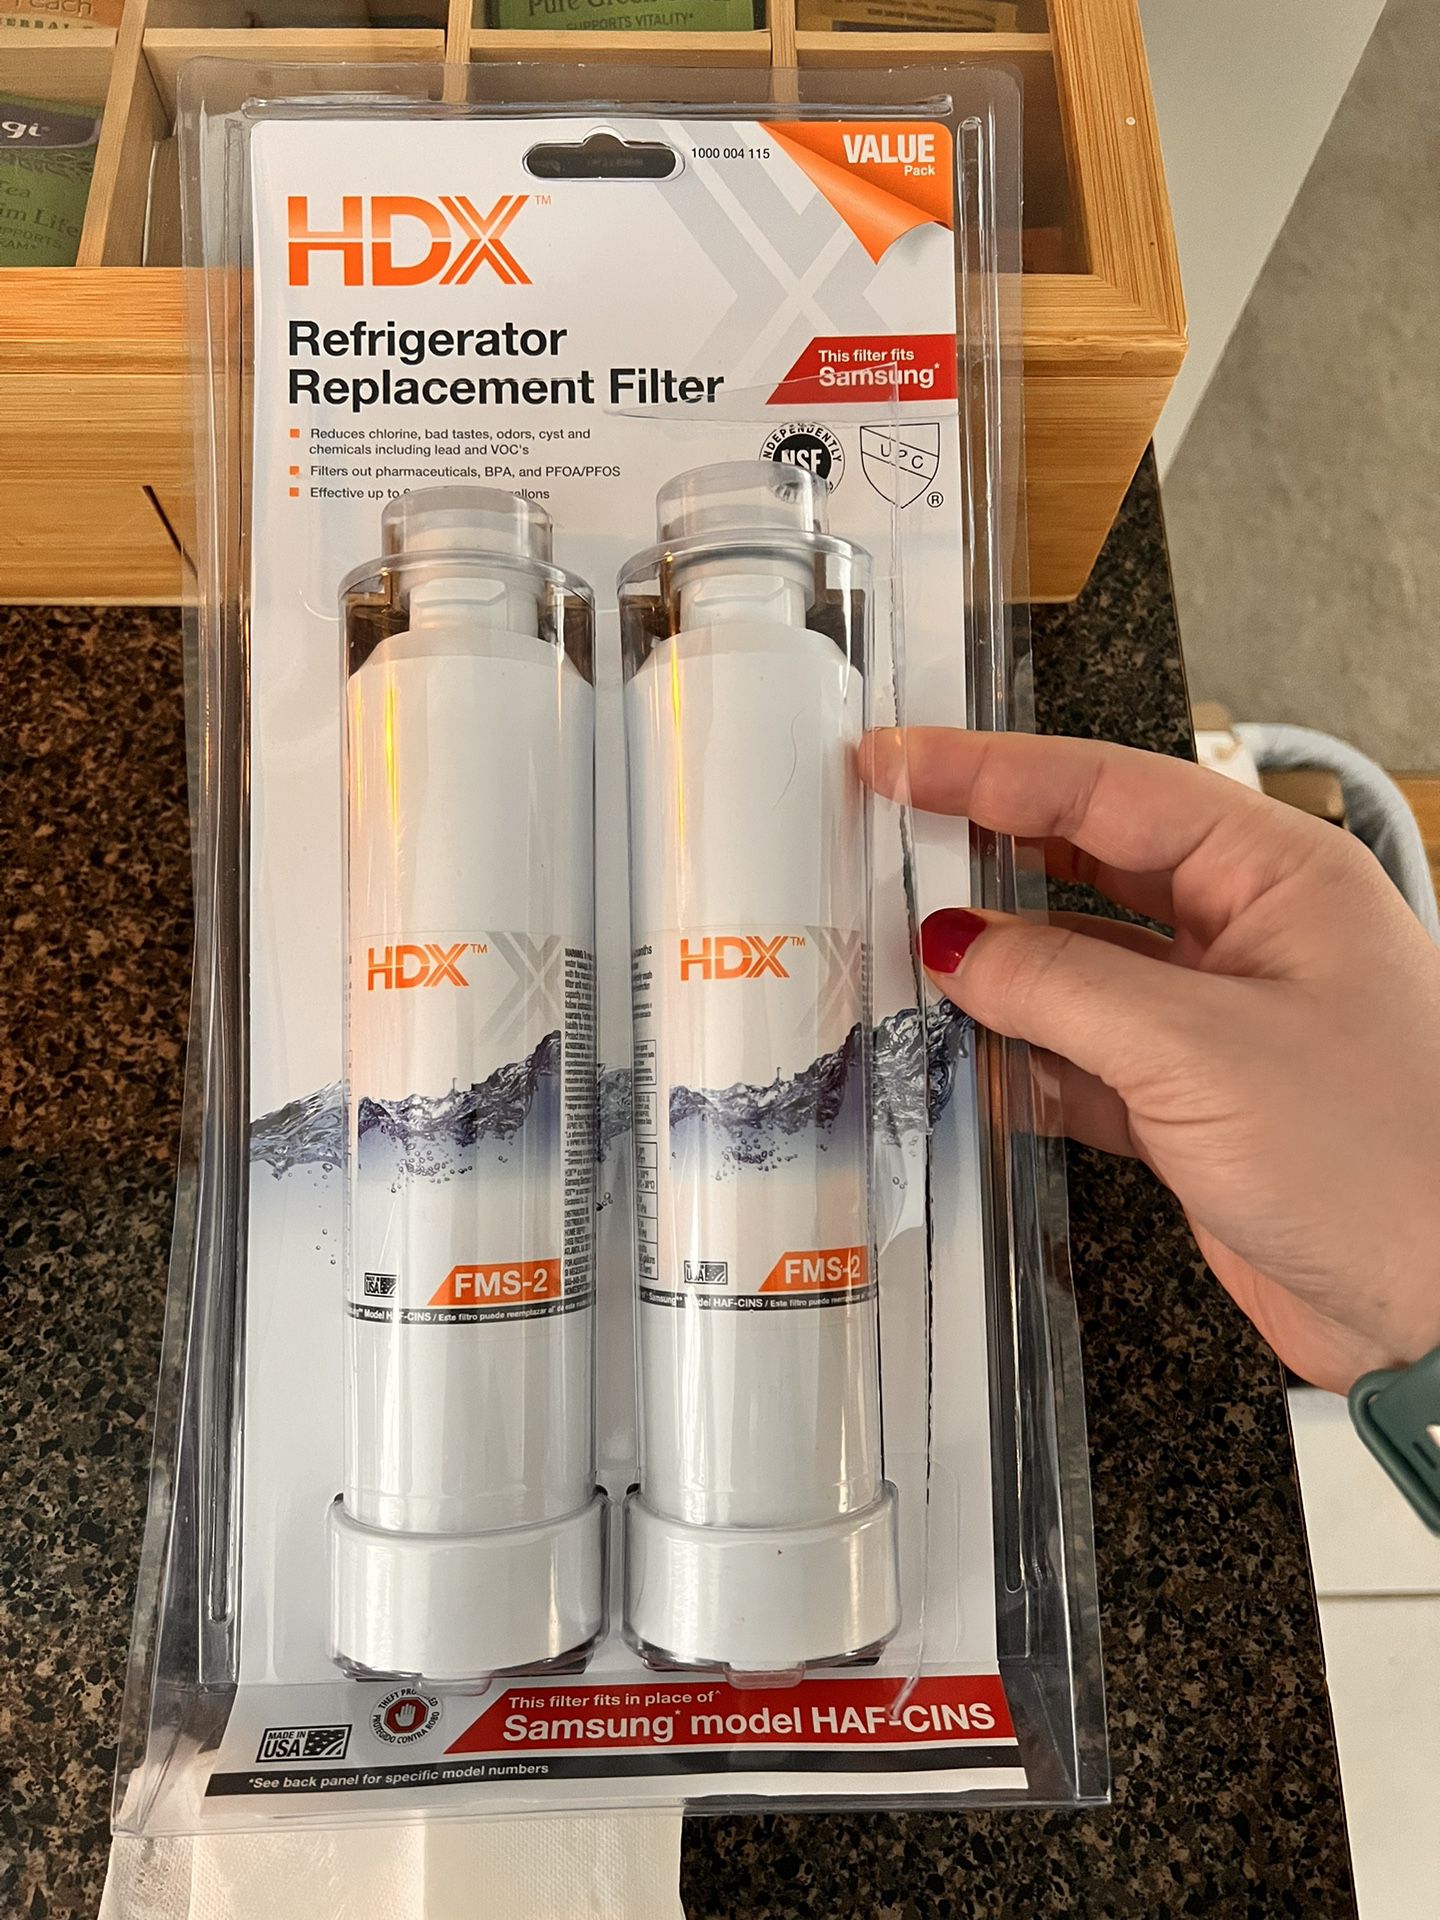 HDX refrigerator Replacement Filters 